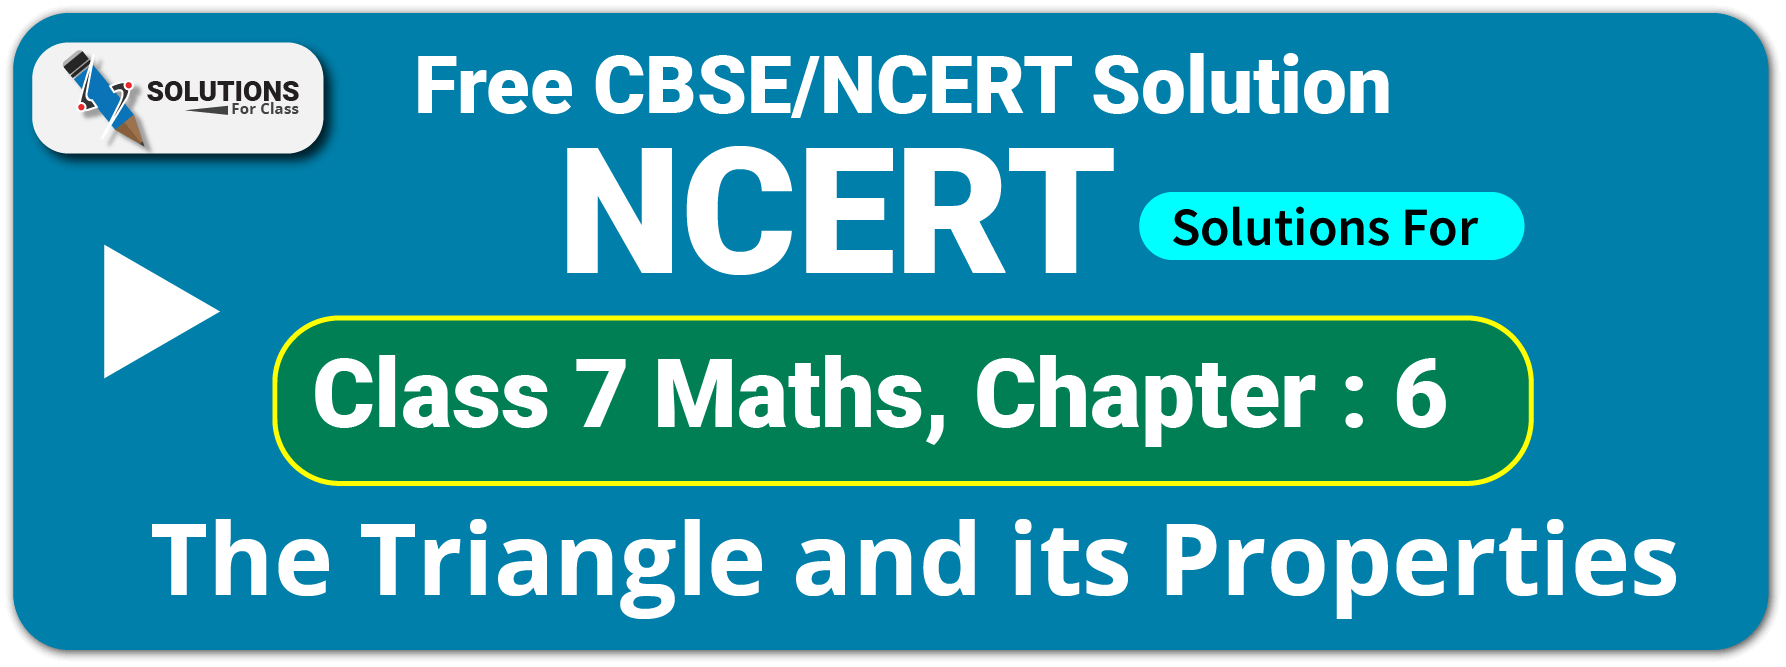 NCERT Solutions Class 7 Maths Chapter 6 The Triangle and its Properties